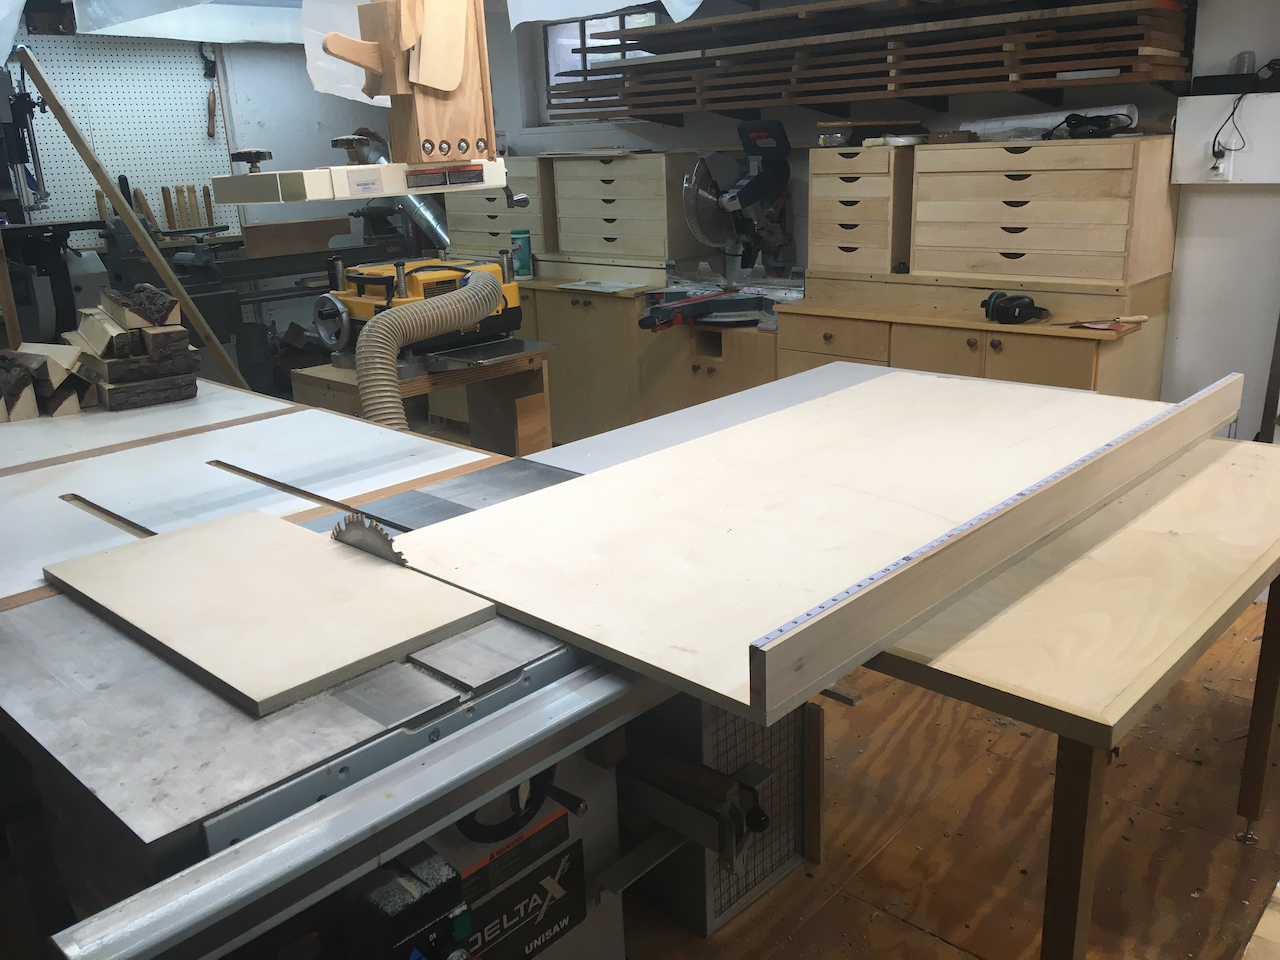 Panel cutting jig and infeed support table